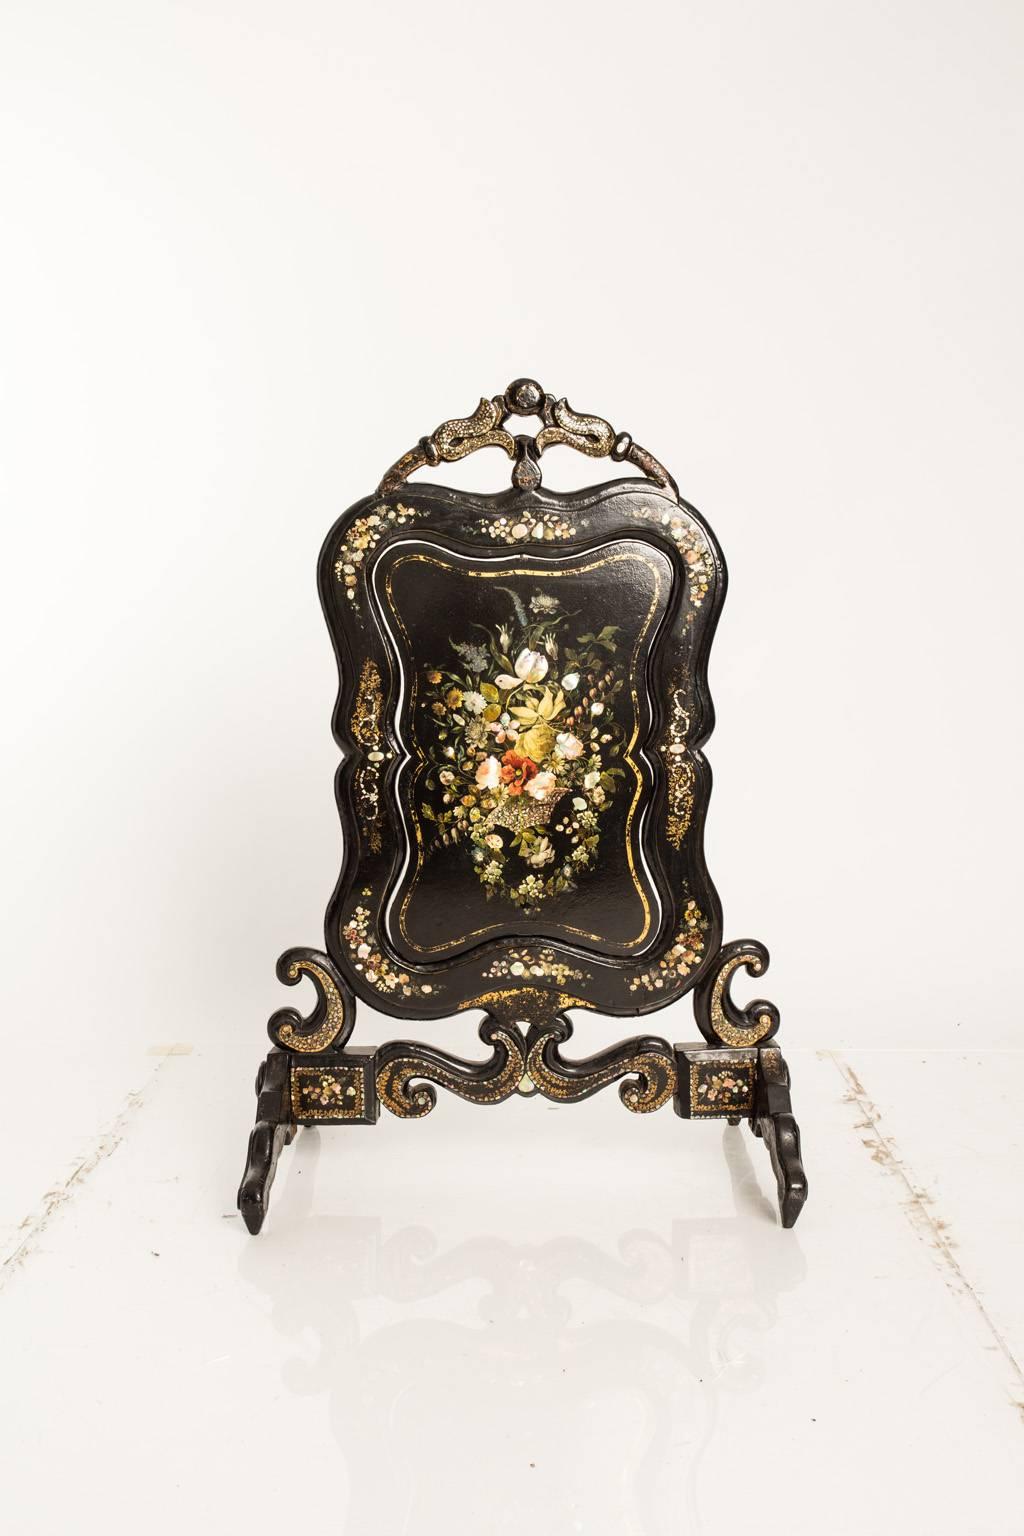 Victorian style fire screen with a floral motif decoration on its front.